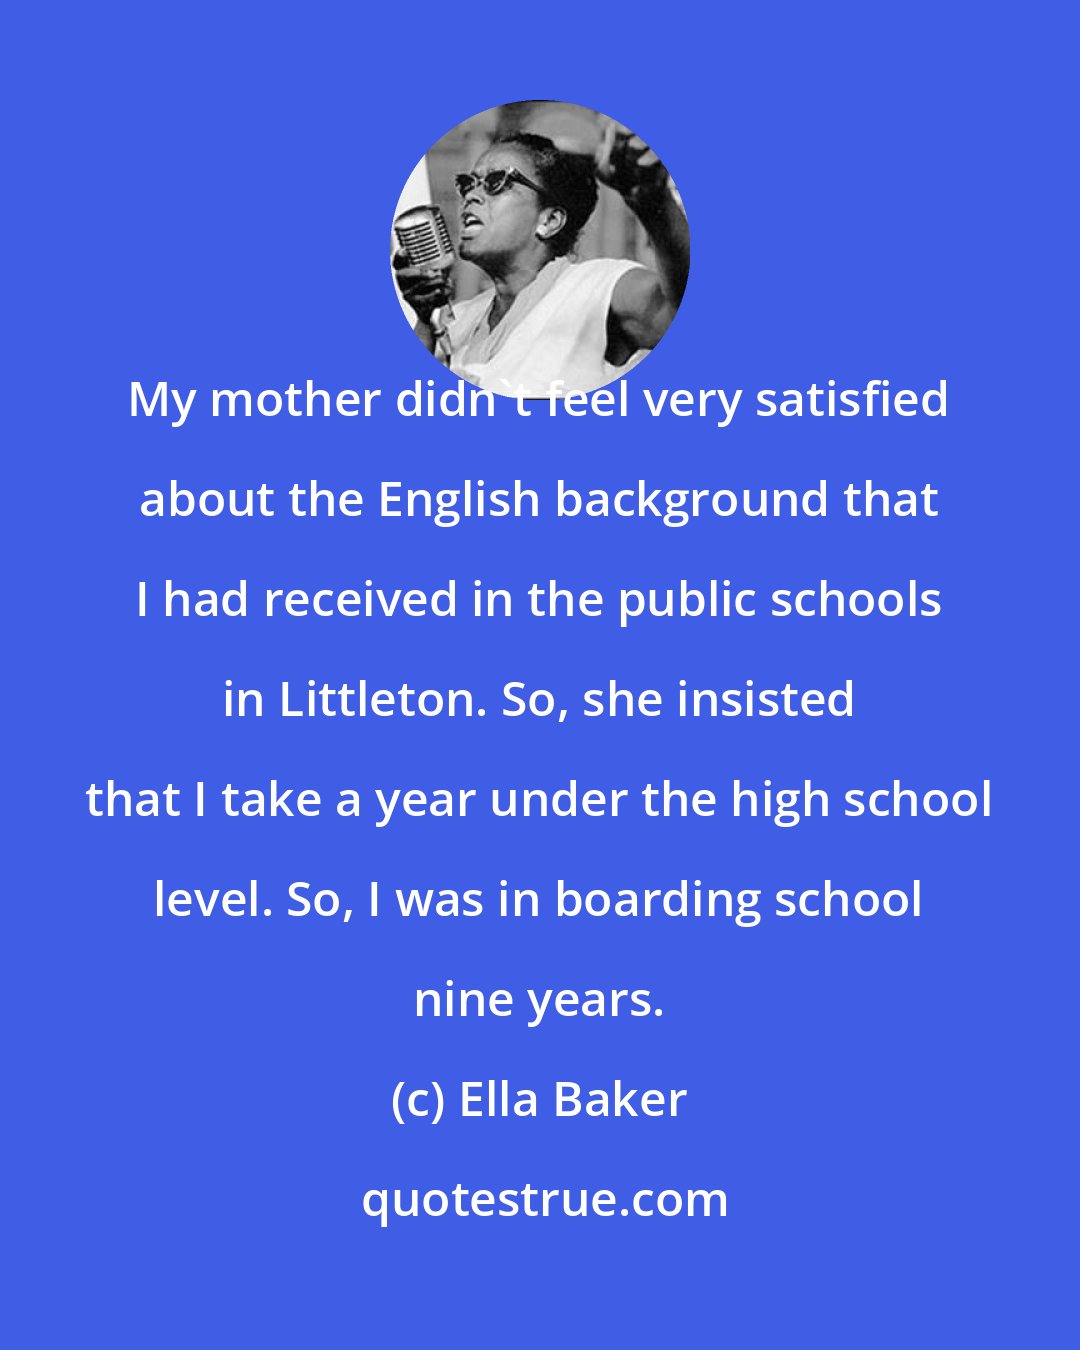 Ella Baker: My mother didn't feel very satisfied about the English background that I had received in the public schools in Littleton. So, she insisted that I take a year under the high school level. So, I was in boarding school nine years.